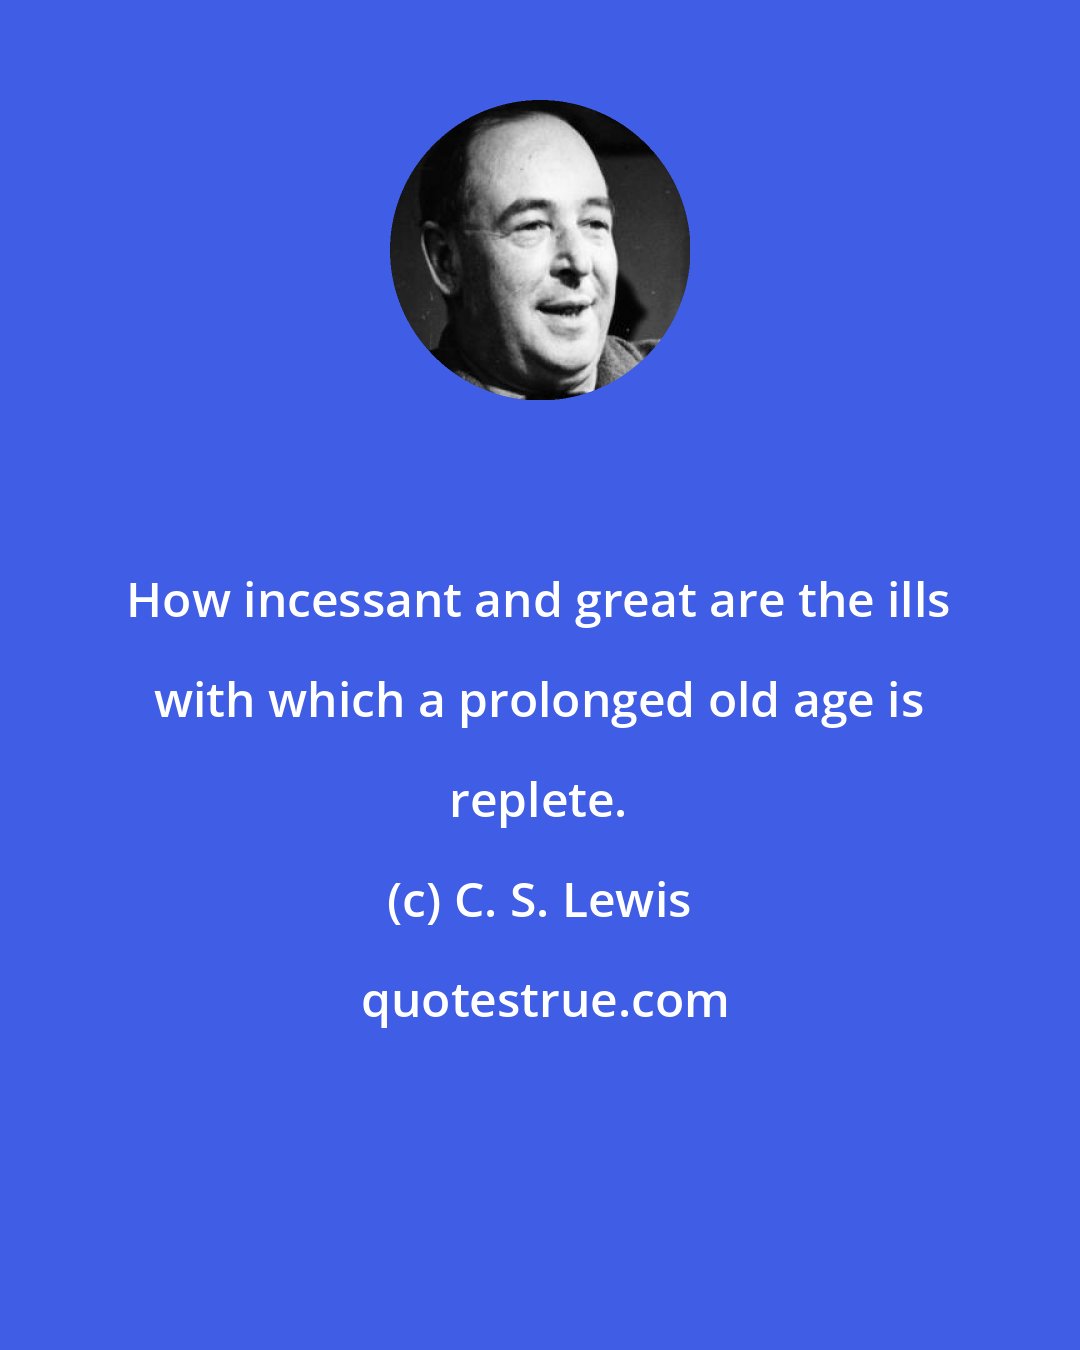 C. S. Lewis: How incessant and great are the ills with which a prolonged old age is replete.